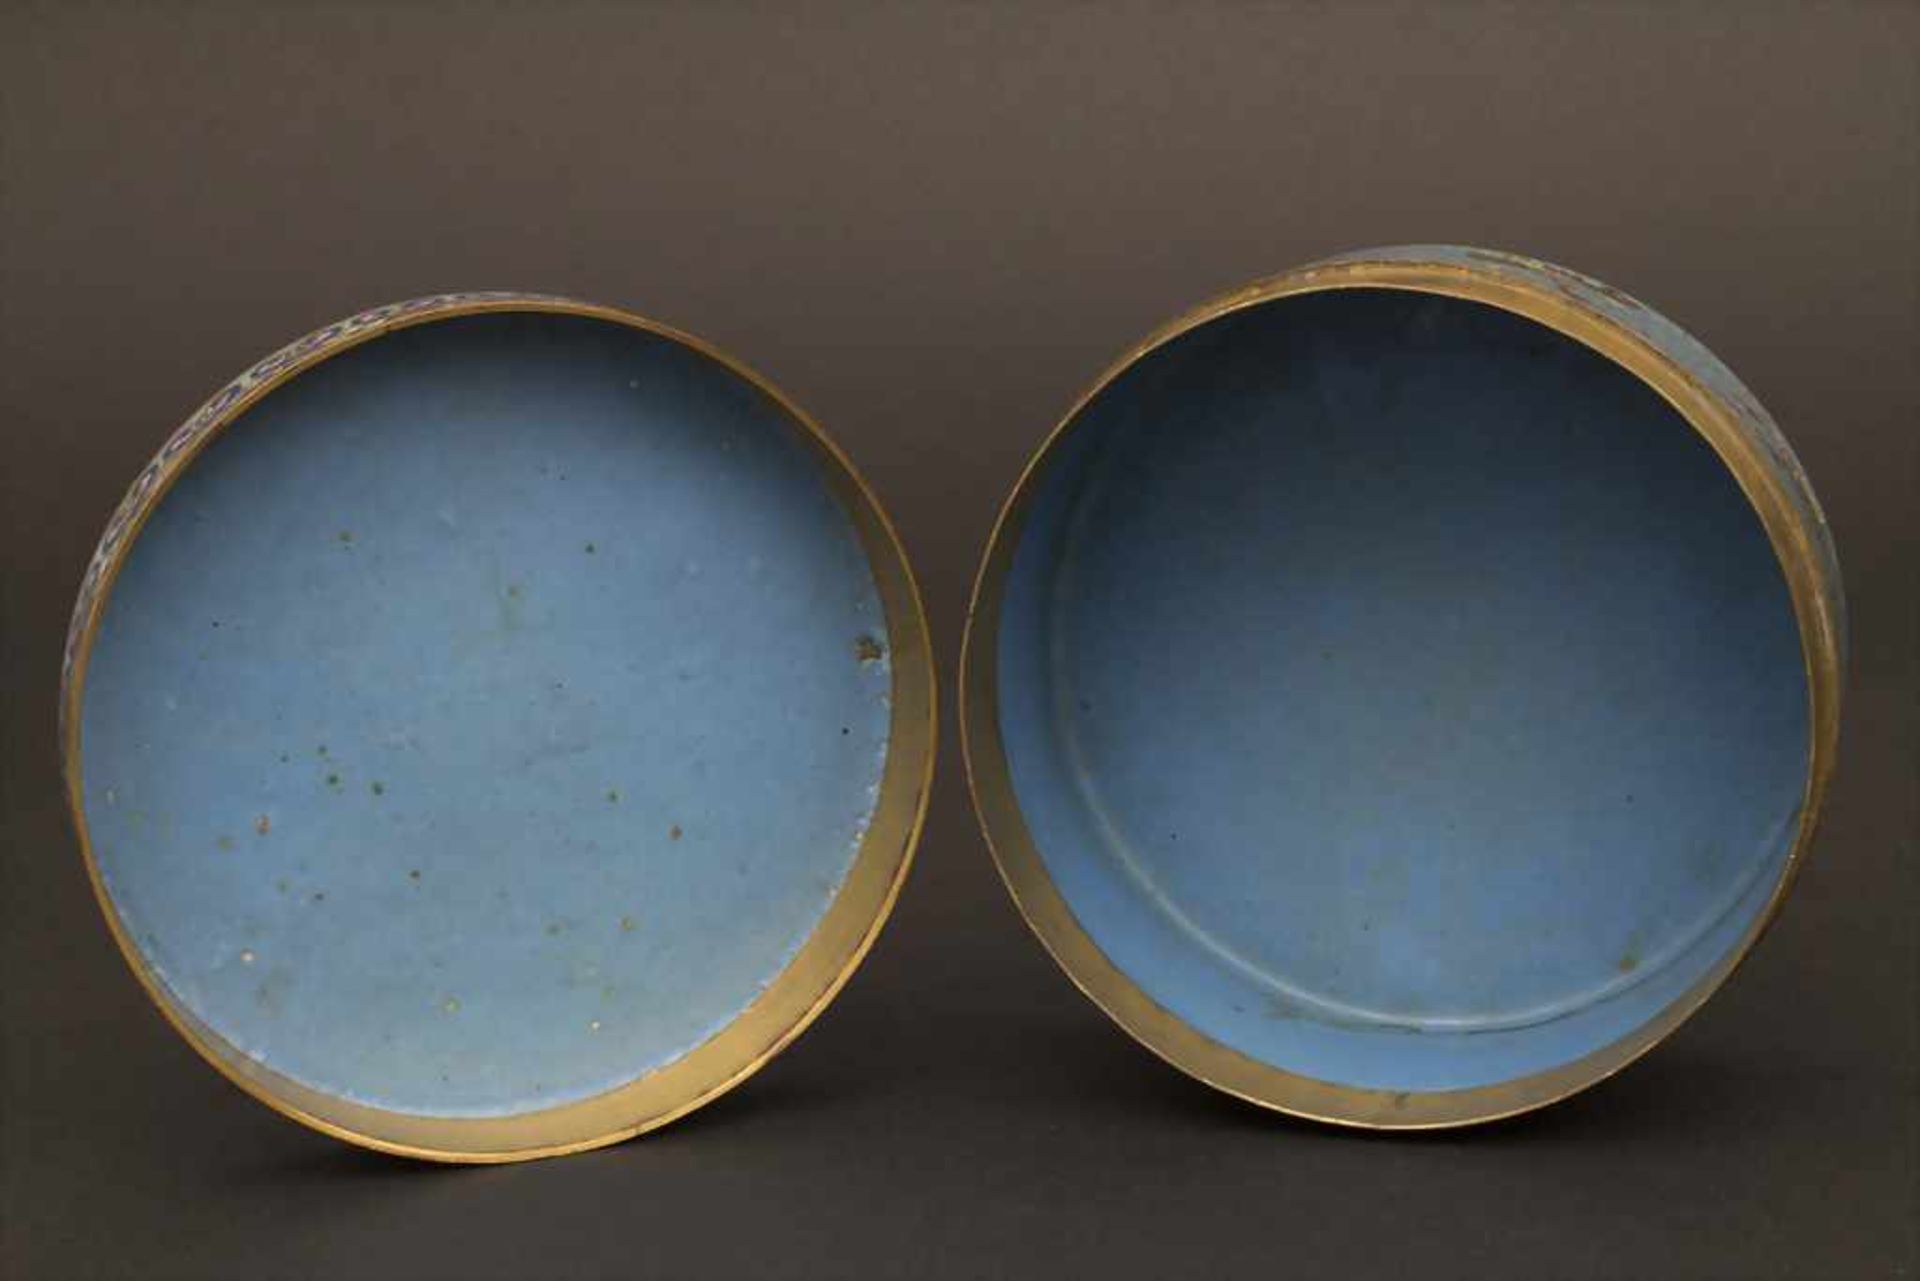 Cloisonné-Deckeldose, China, Qing-Dynastie, 18./19. Jh.< - Image 7 of 7